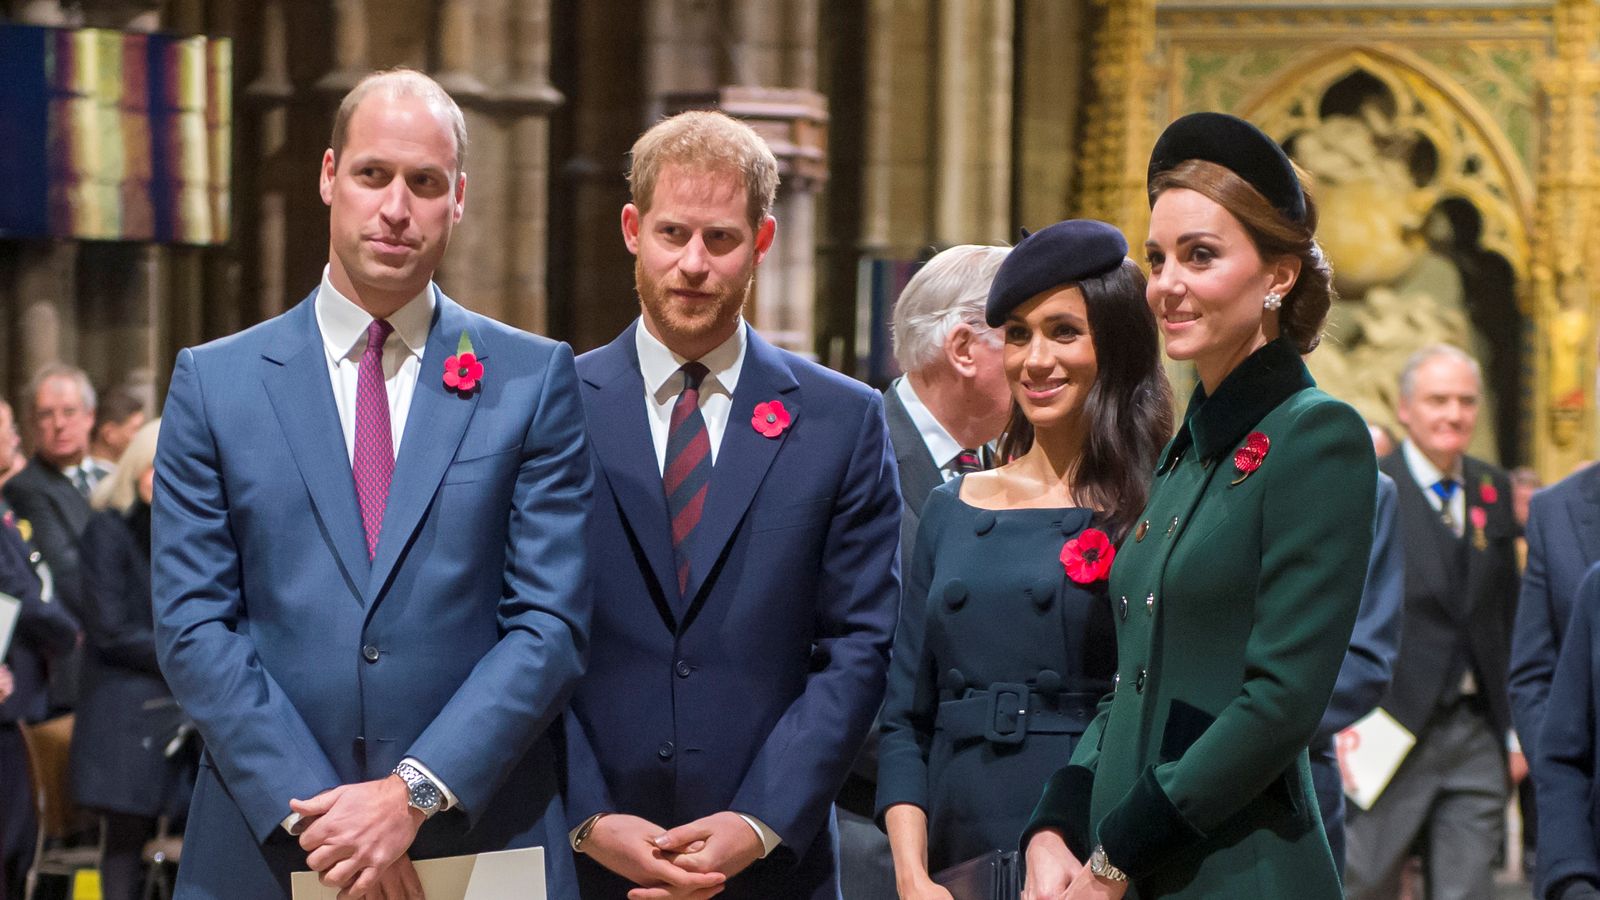 Harry and Meghan joined by world leaders and celebrities in sharing messages of support for Kate